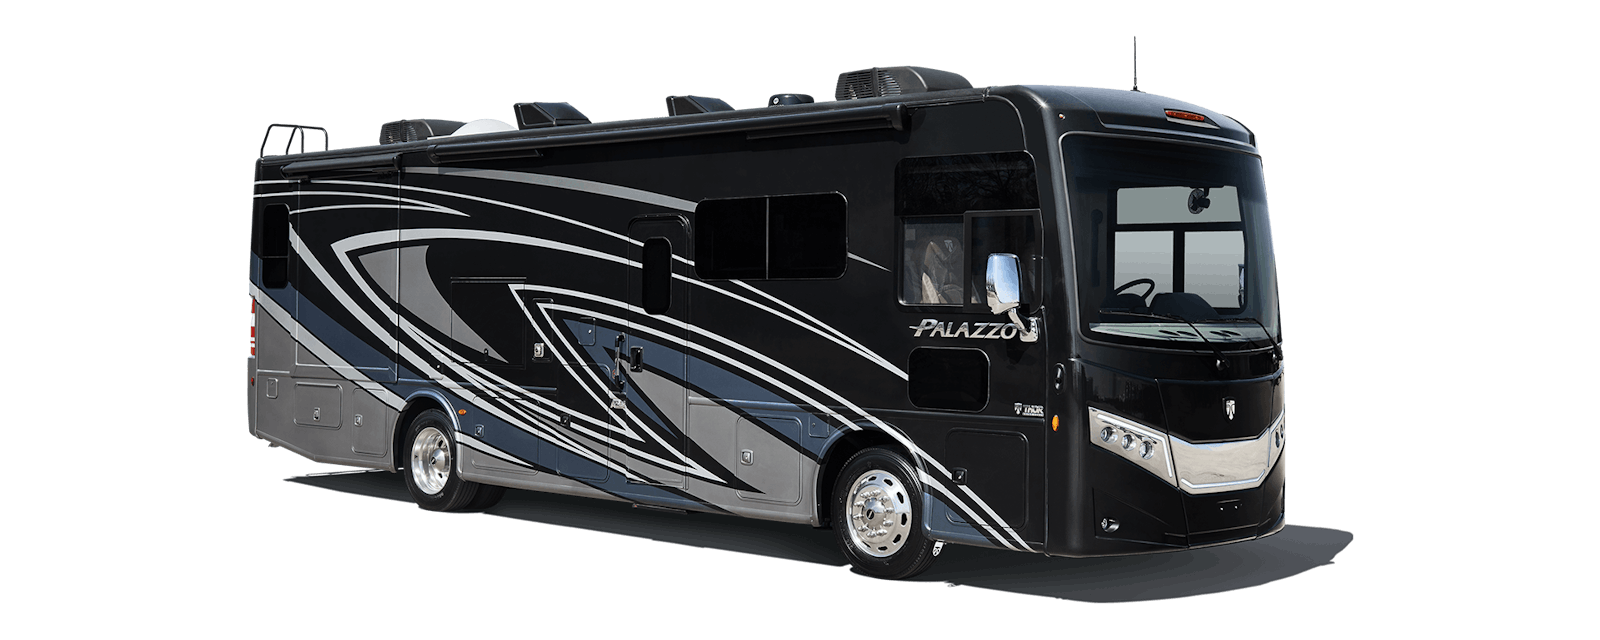 2023 Thor Palazzo Class A Diesel Pusher RV Pacific Dunes Exterior Photo